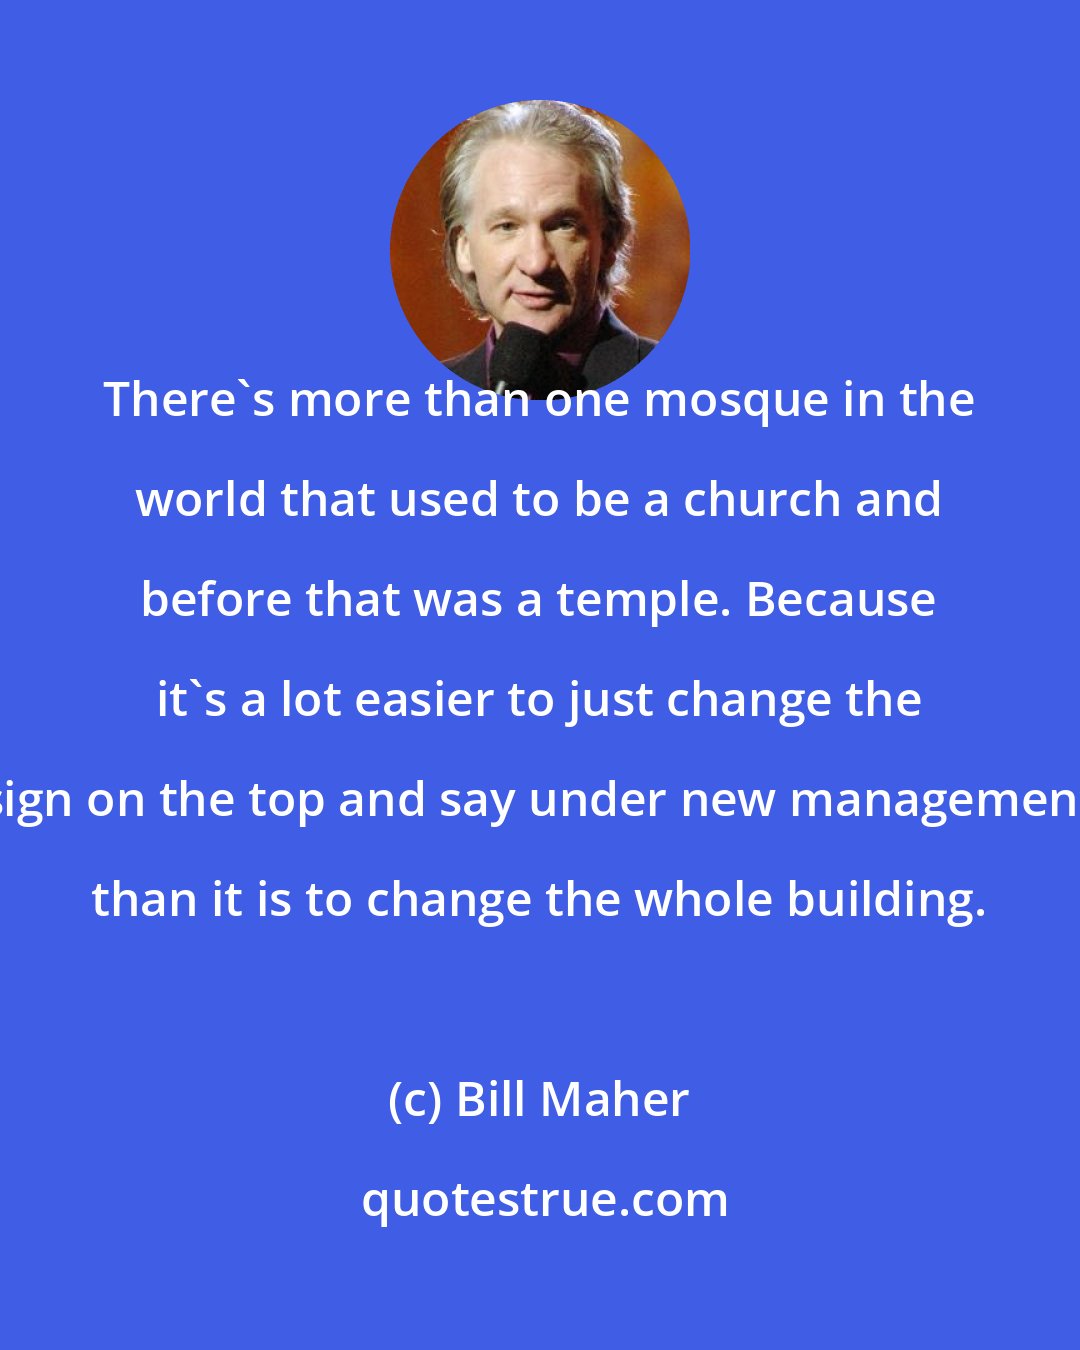 Bill Maher: There's more than one mosque in the world that used to be a church and before that was a temple. Because it's a lot easier to just change the sign on the top and say under new management than it is to change the whole building.